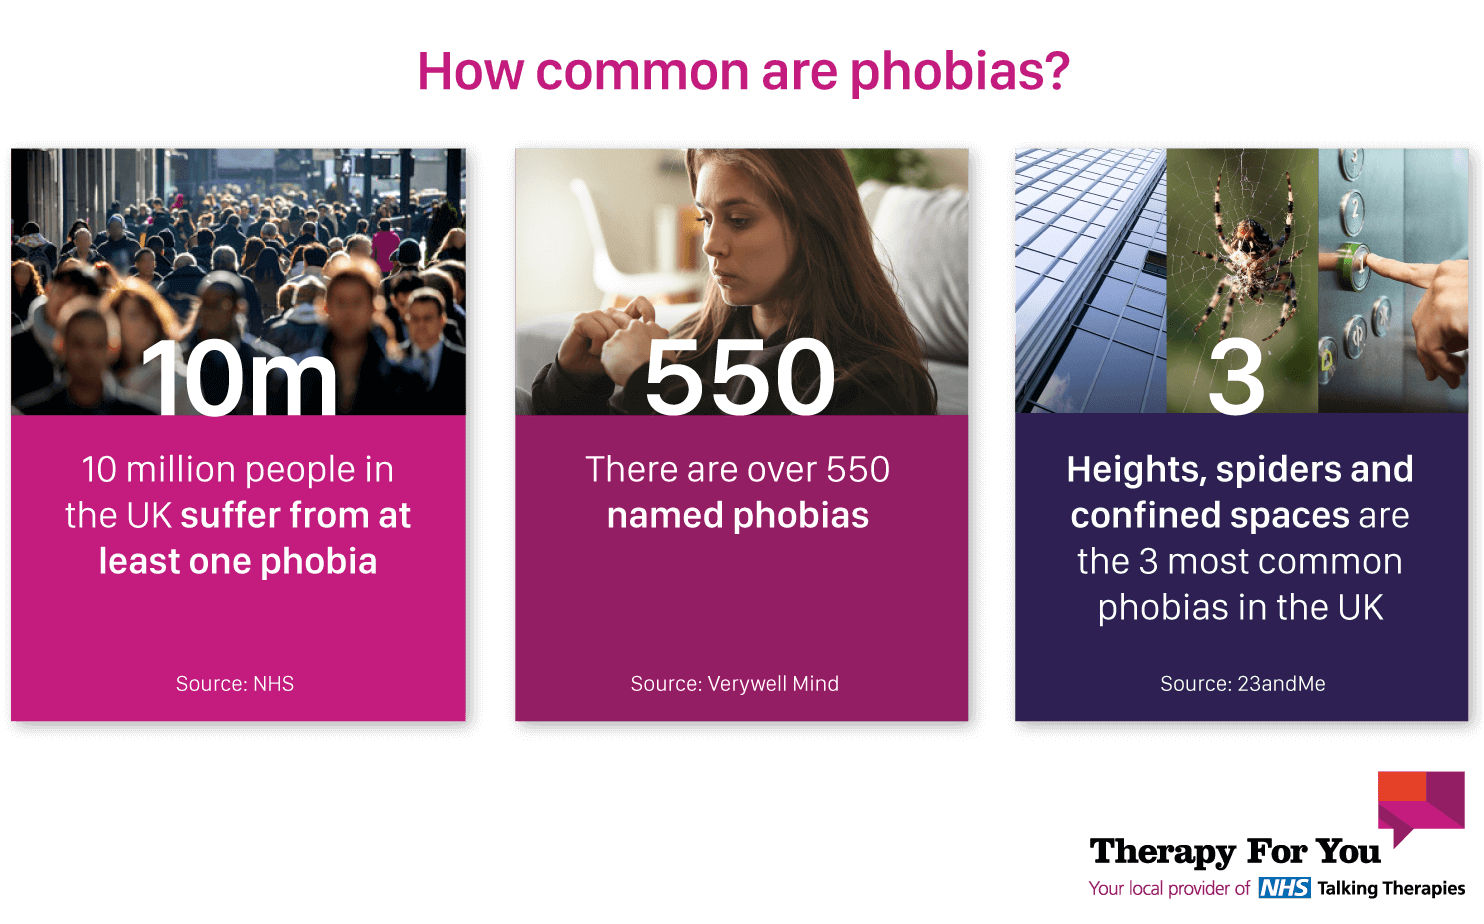 How common are phobias in the UK statistics from various sources